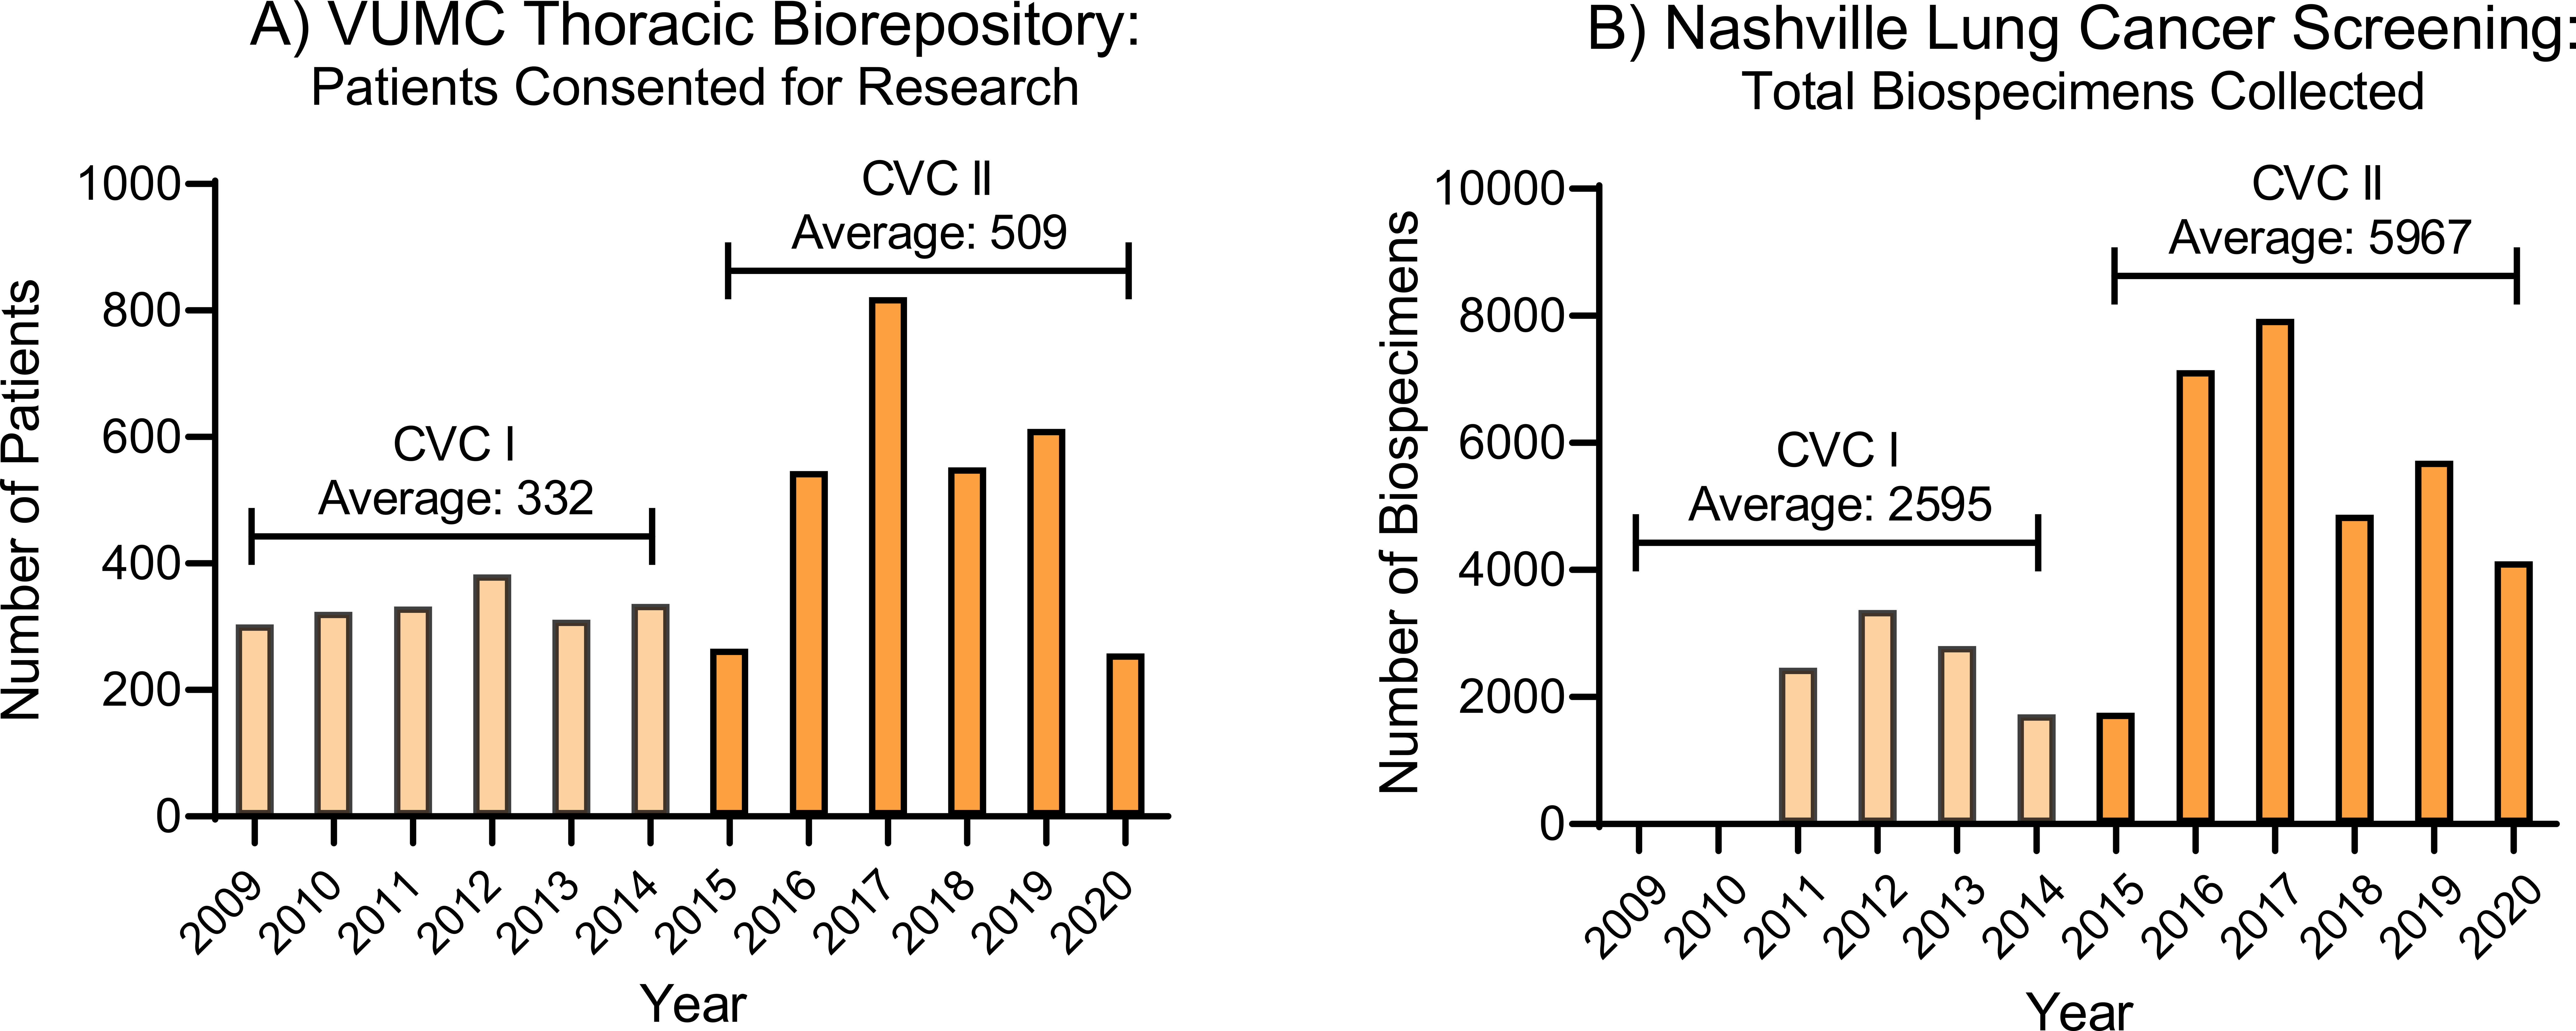 (A) Patients consented for research over time in the VUMC Thoracic Biorepository. (B) Samples collected through the Nashville Lung Cancer Screening program.